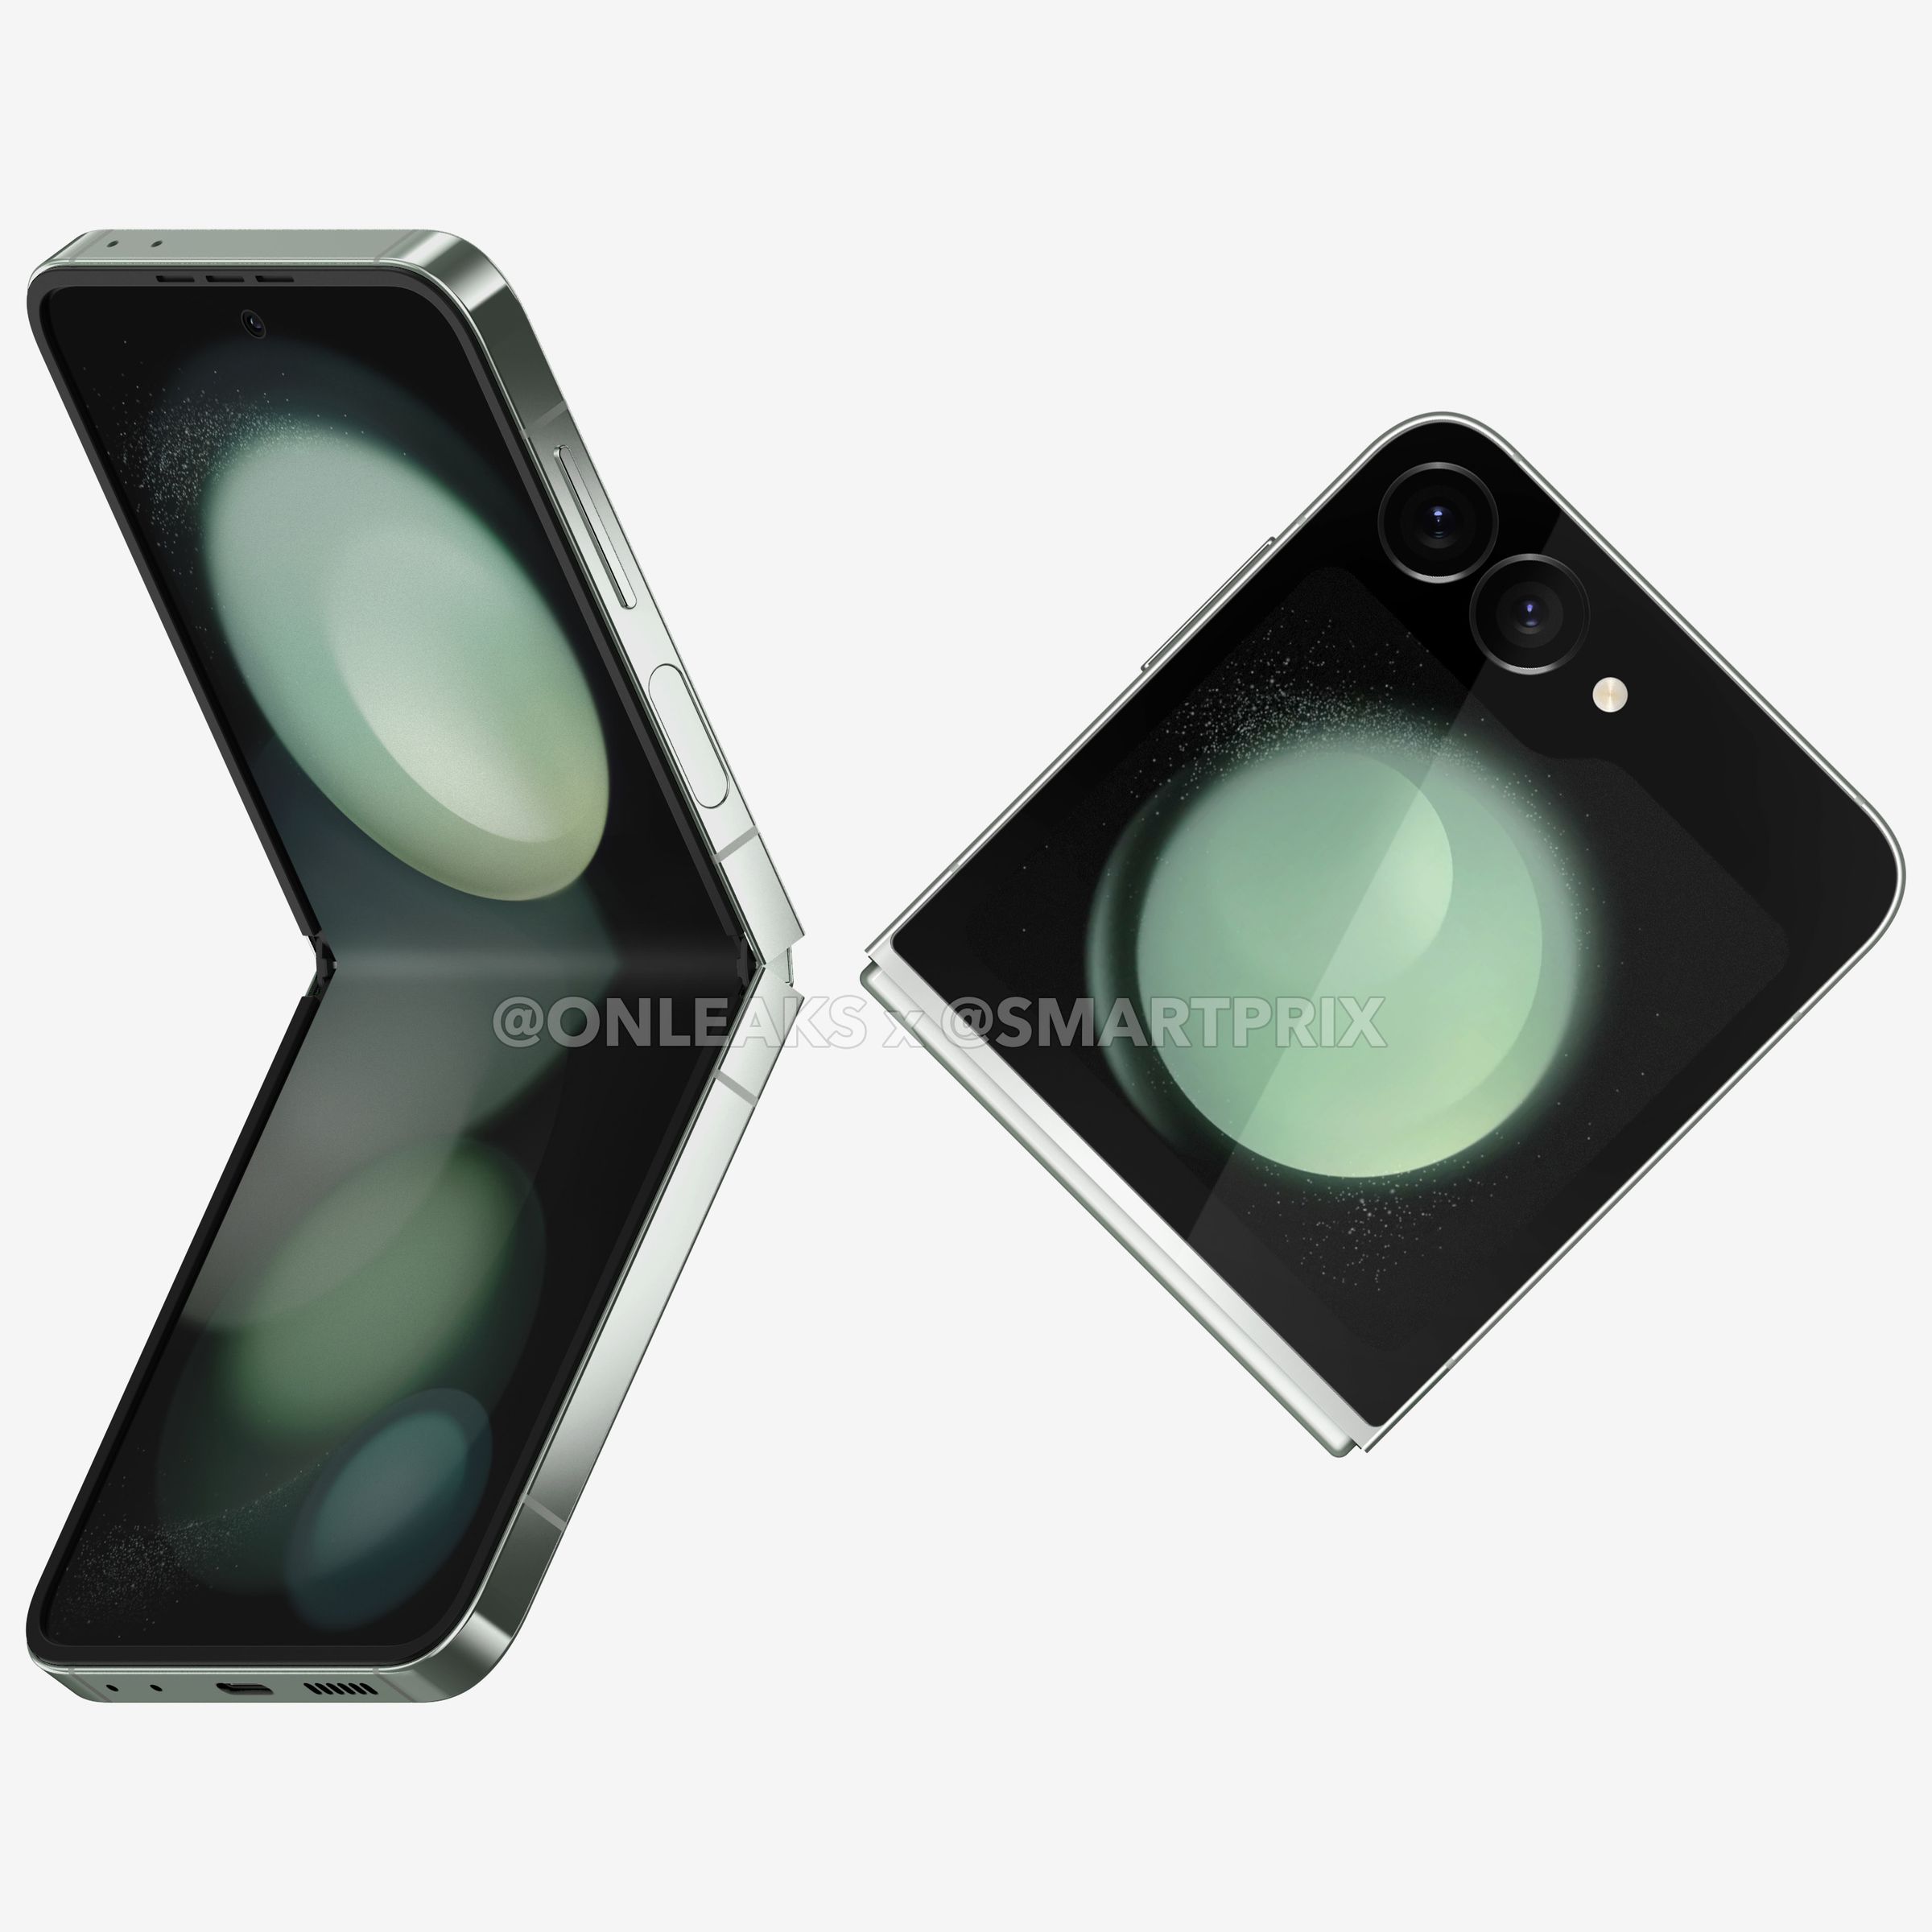 Two renders of the Z Flip 6, one folded and one half-folded.